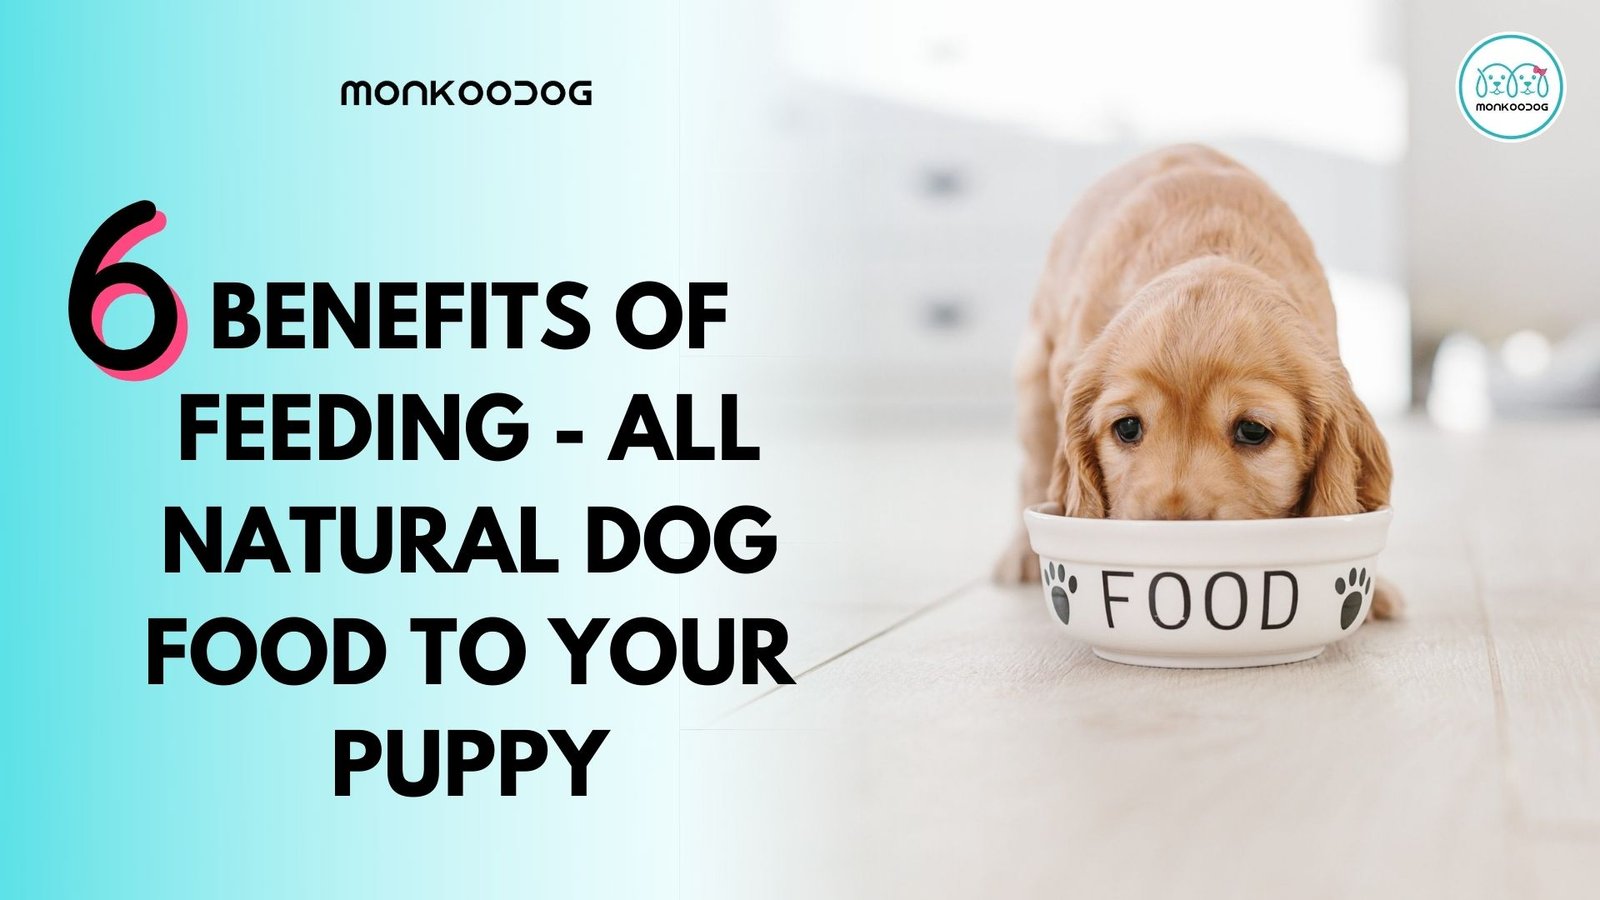 6 benefits of feeding - all natural dog food to your puppy